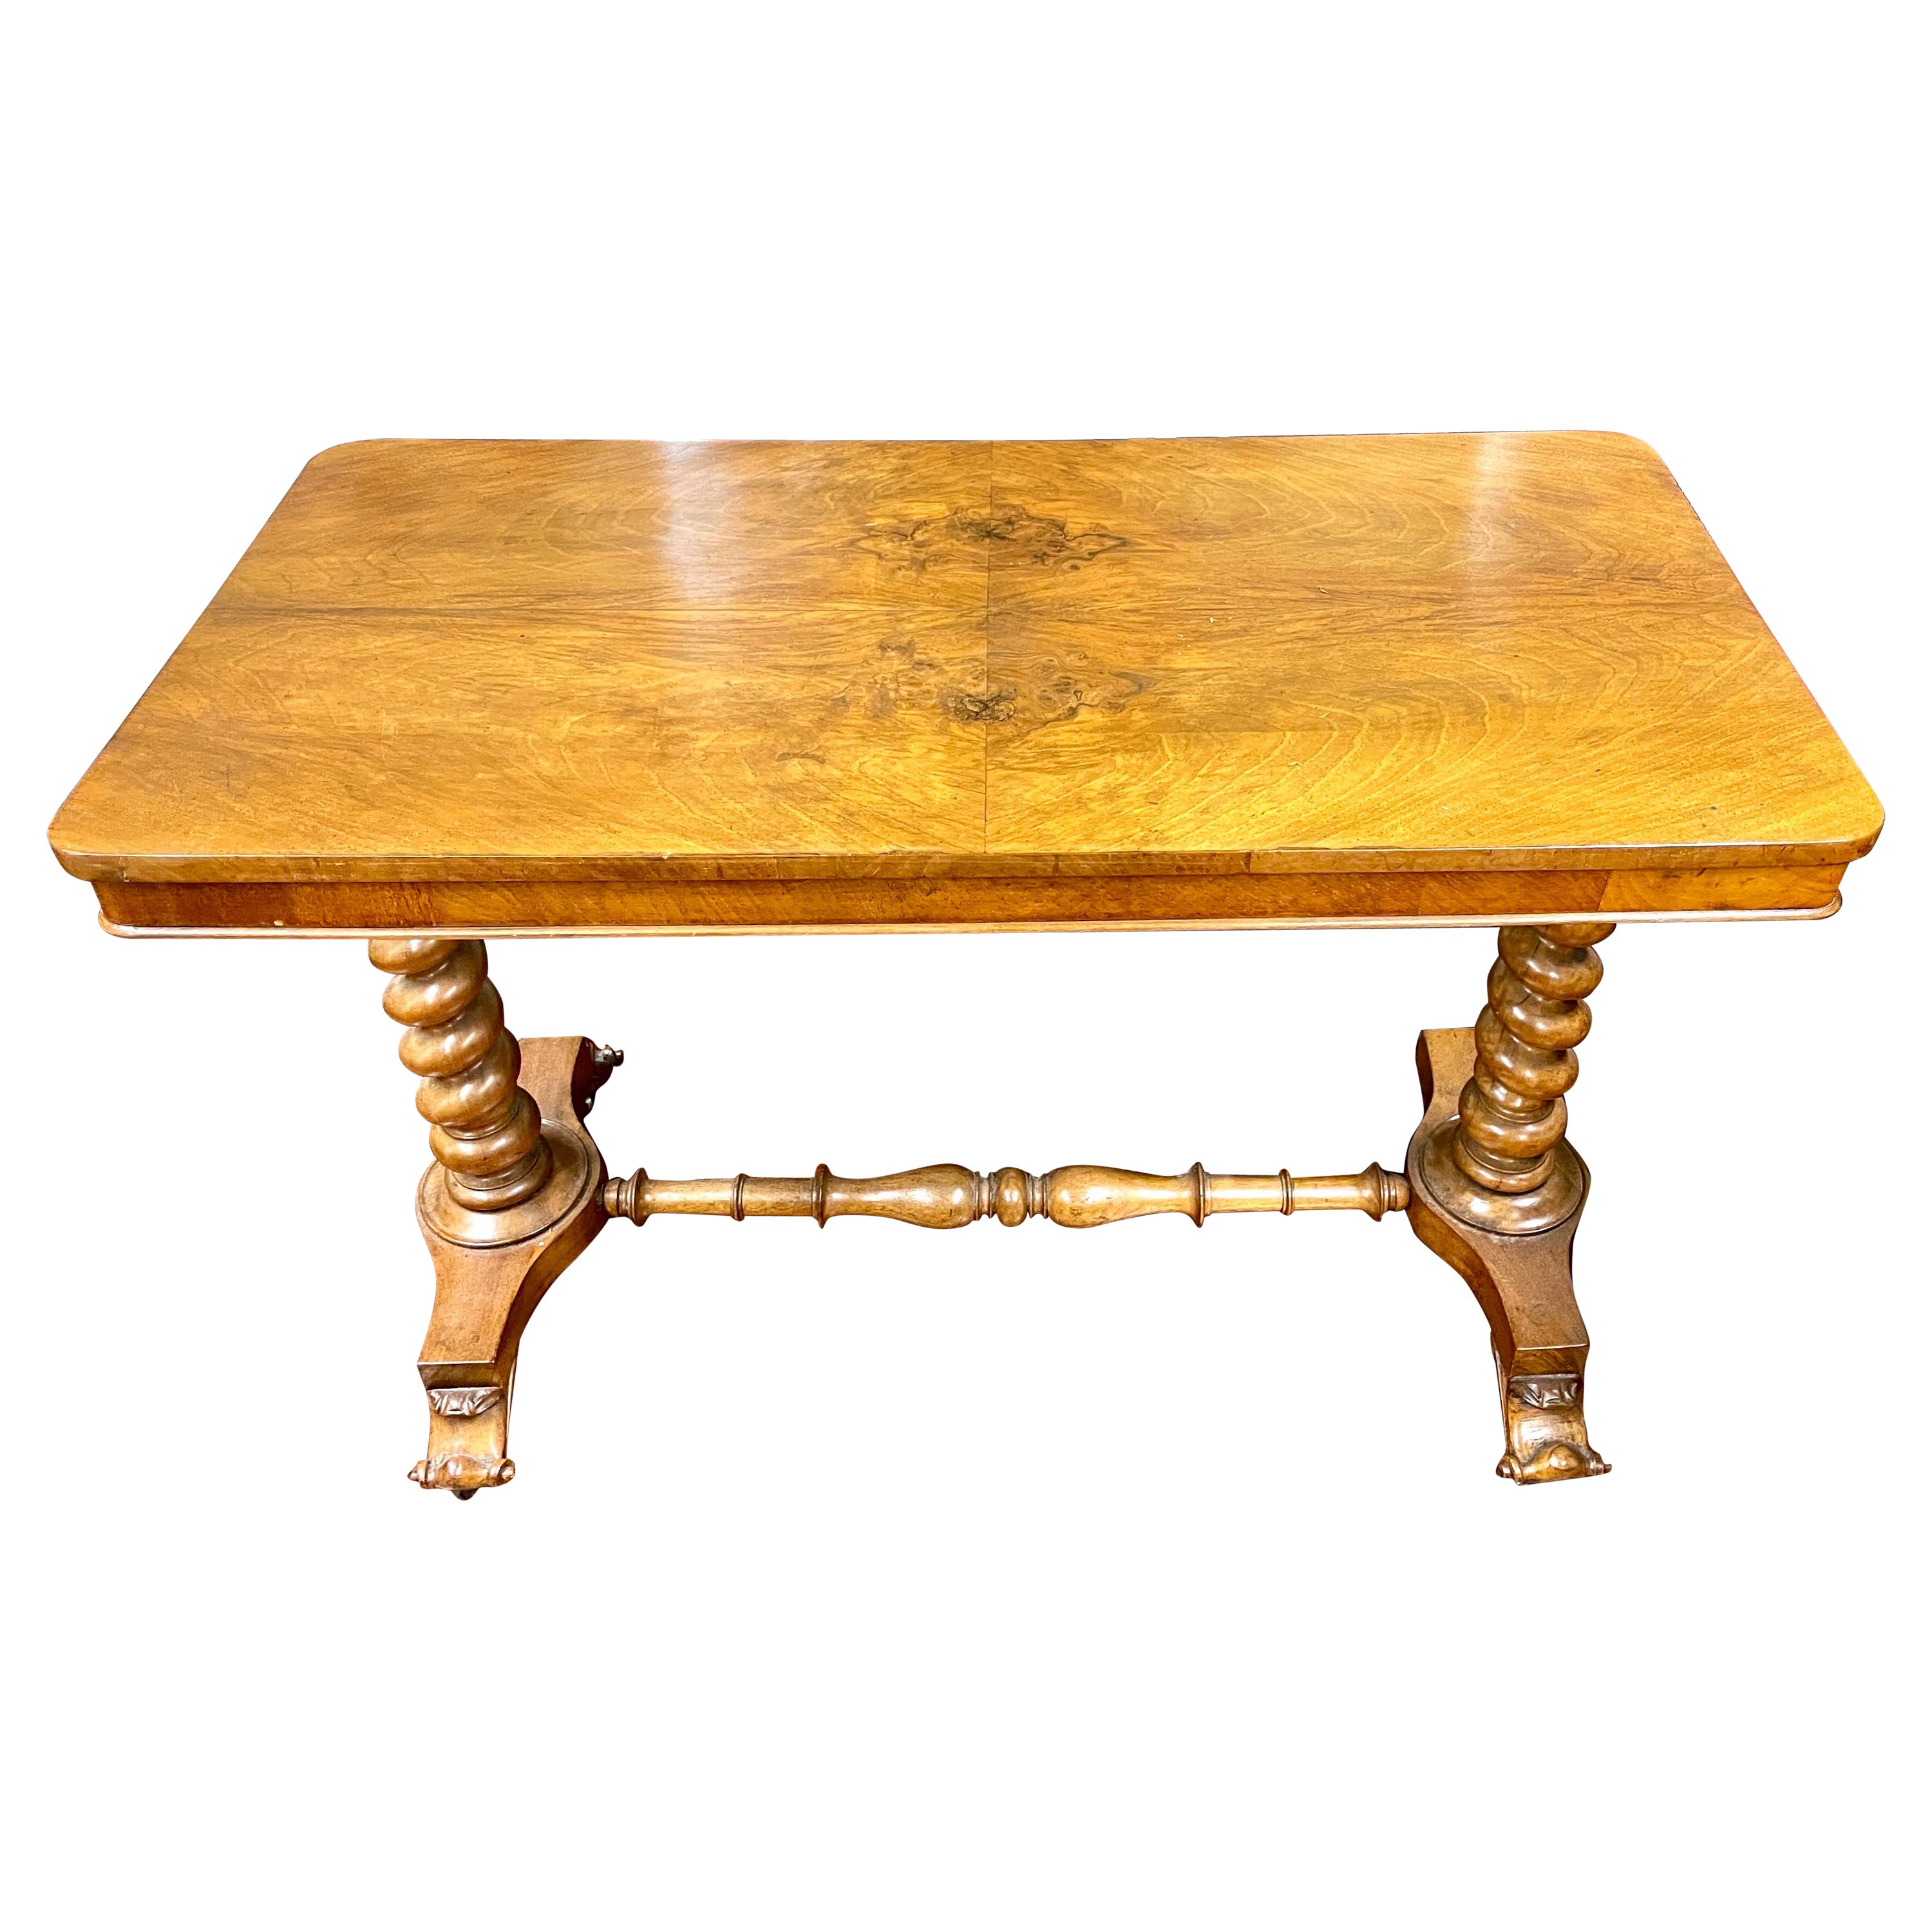 Fine Antique English Burr Walnut Console or Library Table with Barley Twist Legs For Sale